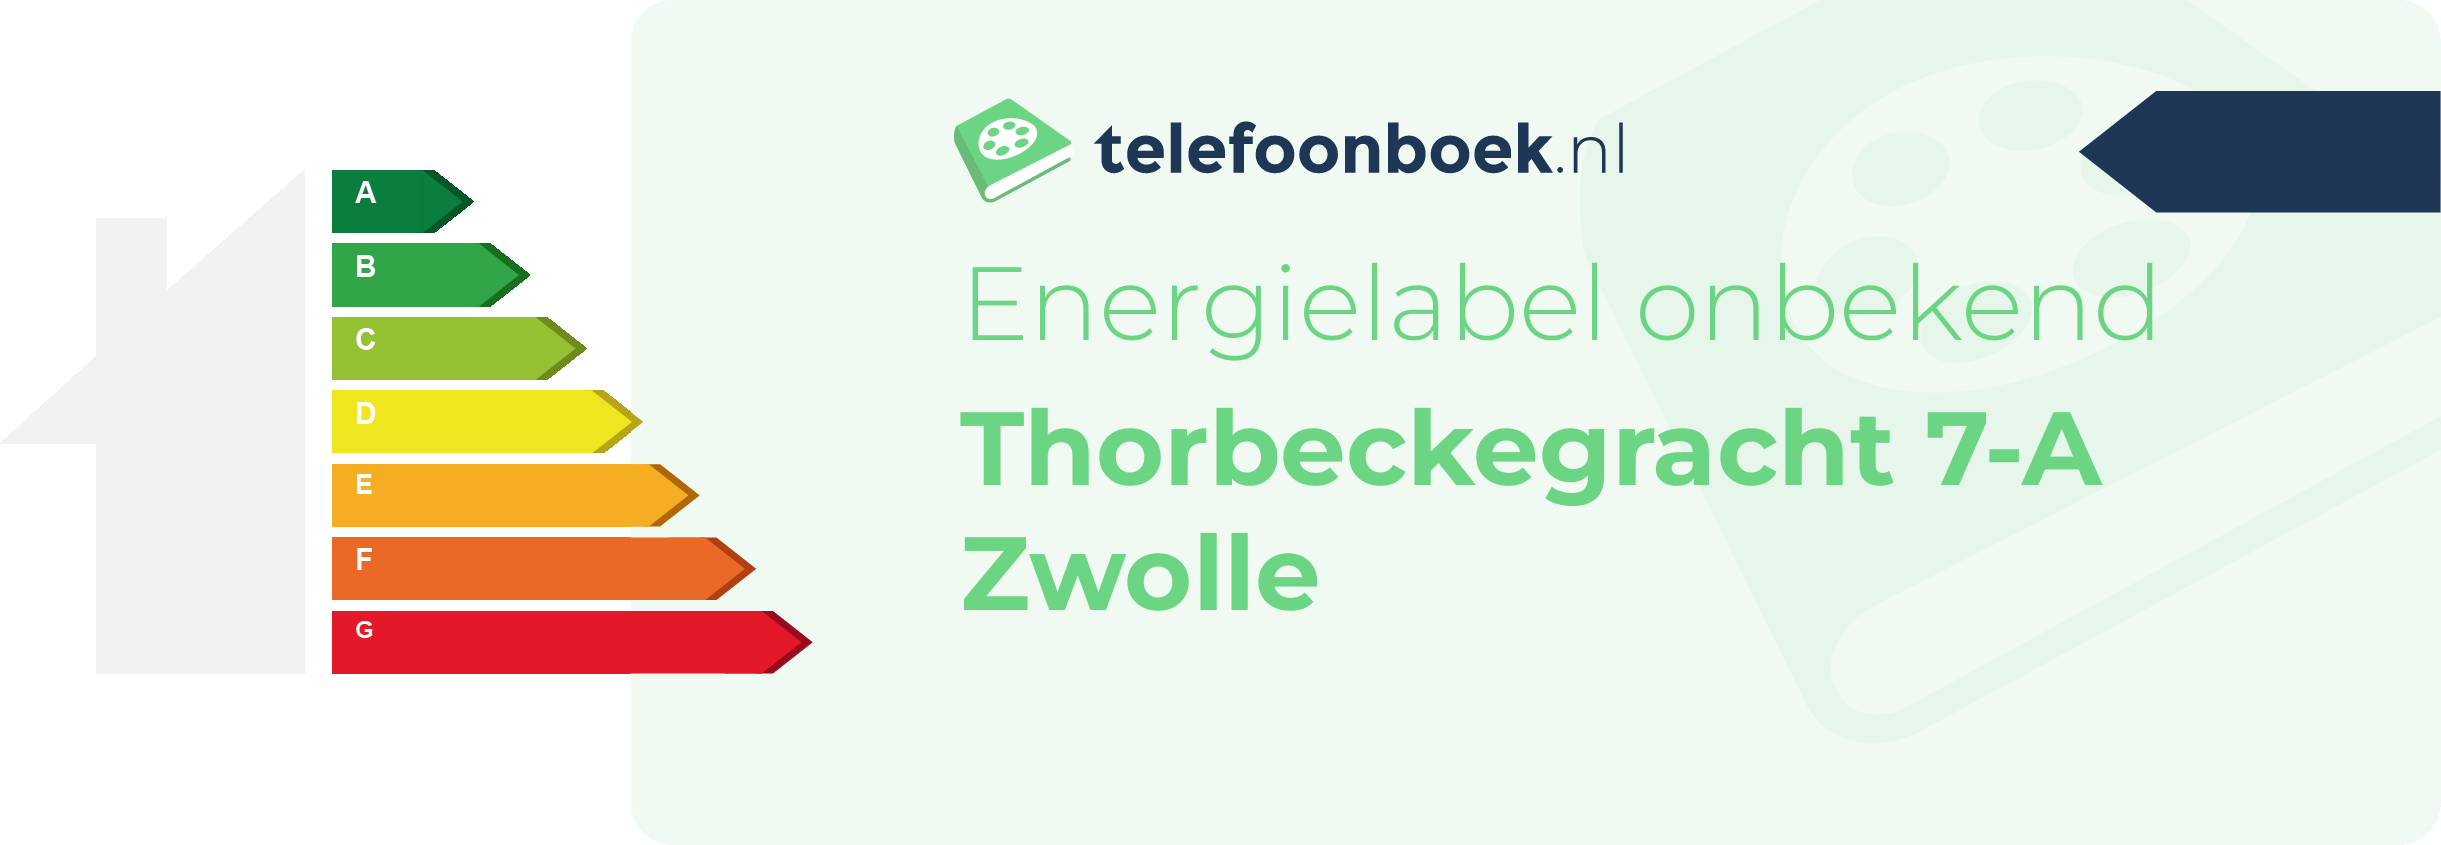 Energielabel Thorbeckegracht 7-A Zwolle